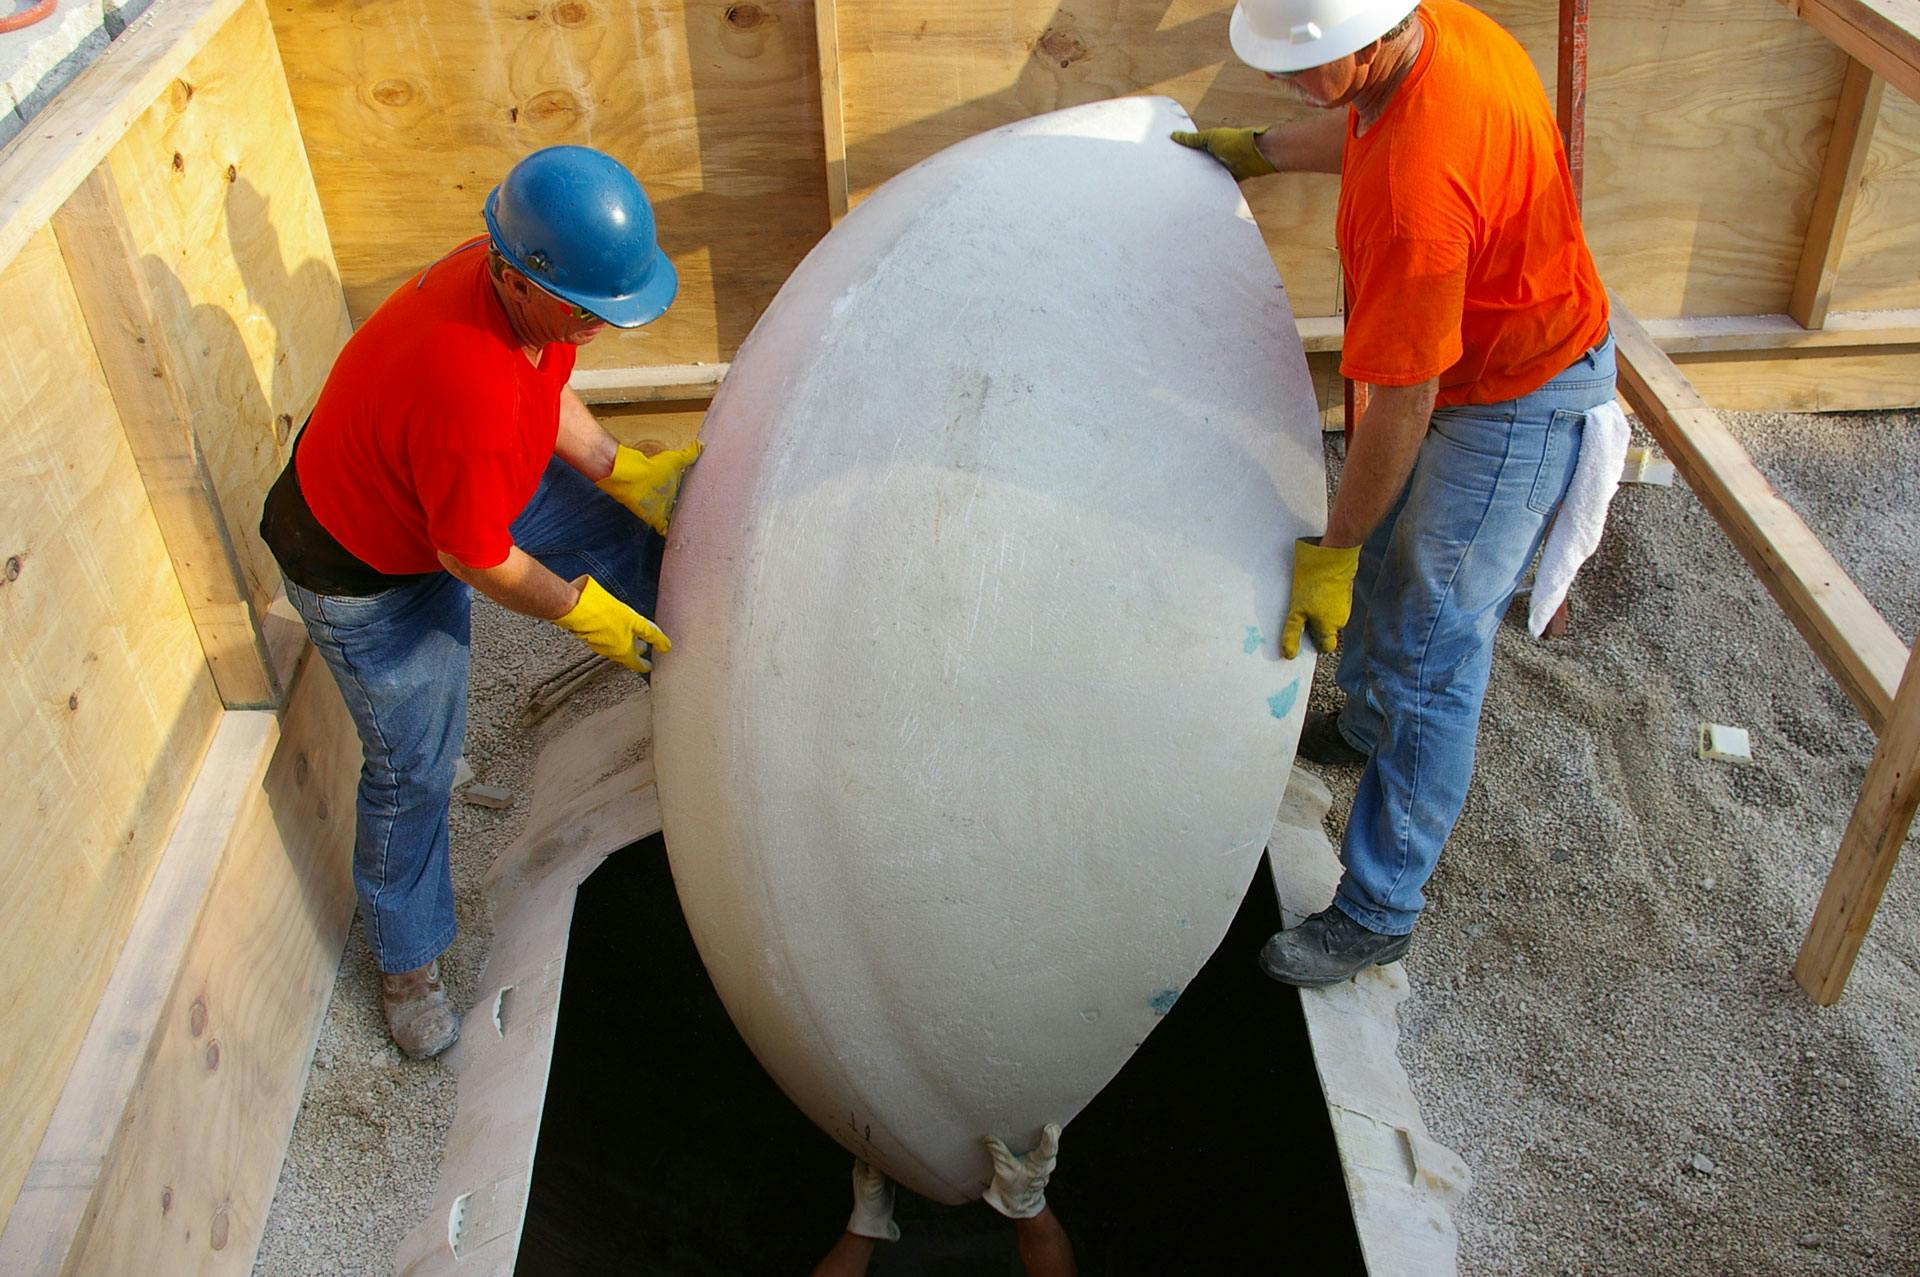 Two wokers lowering an end cap into and existing tank in the ground to a third worker inside the tank. 